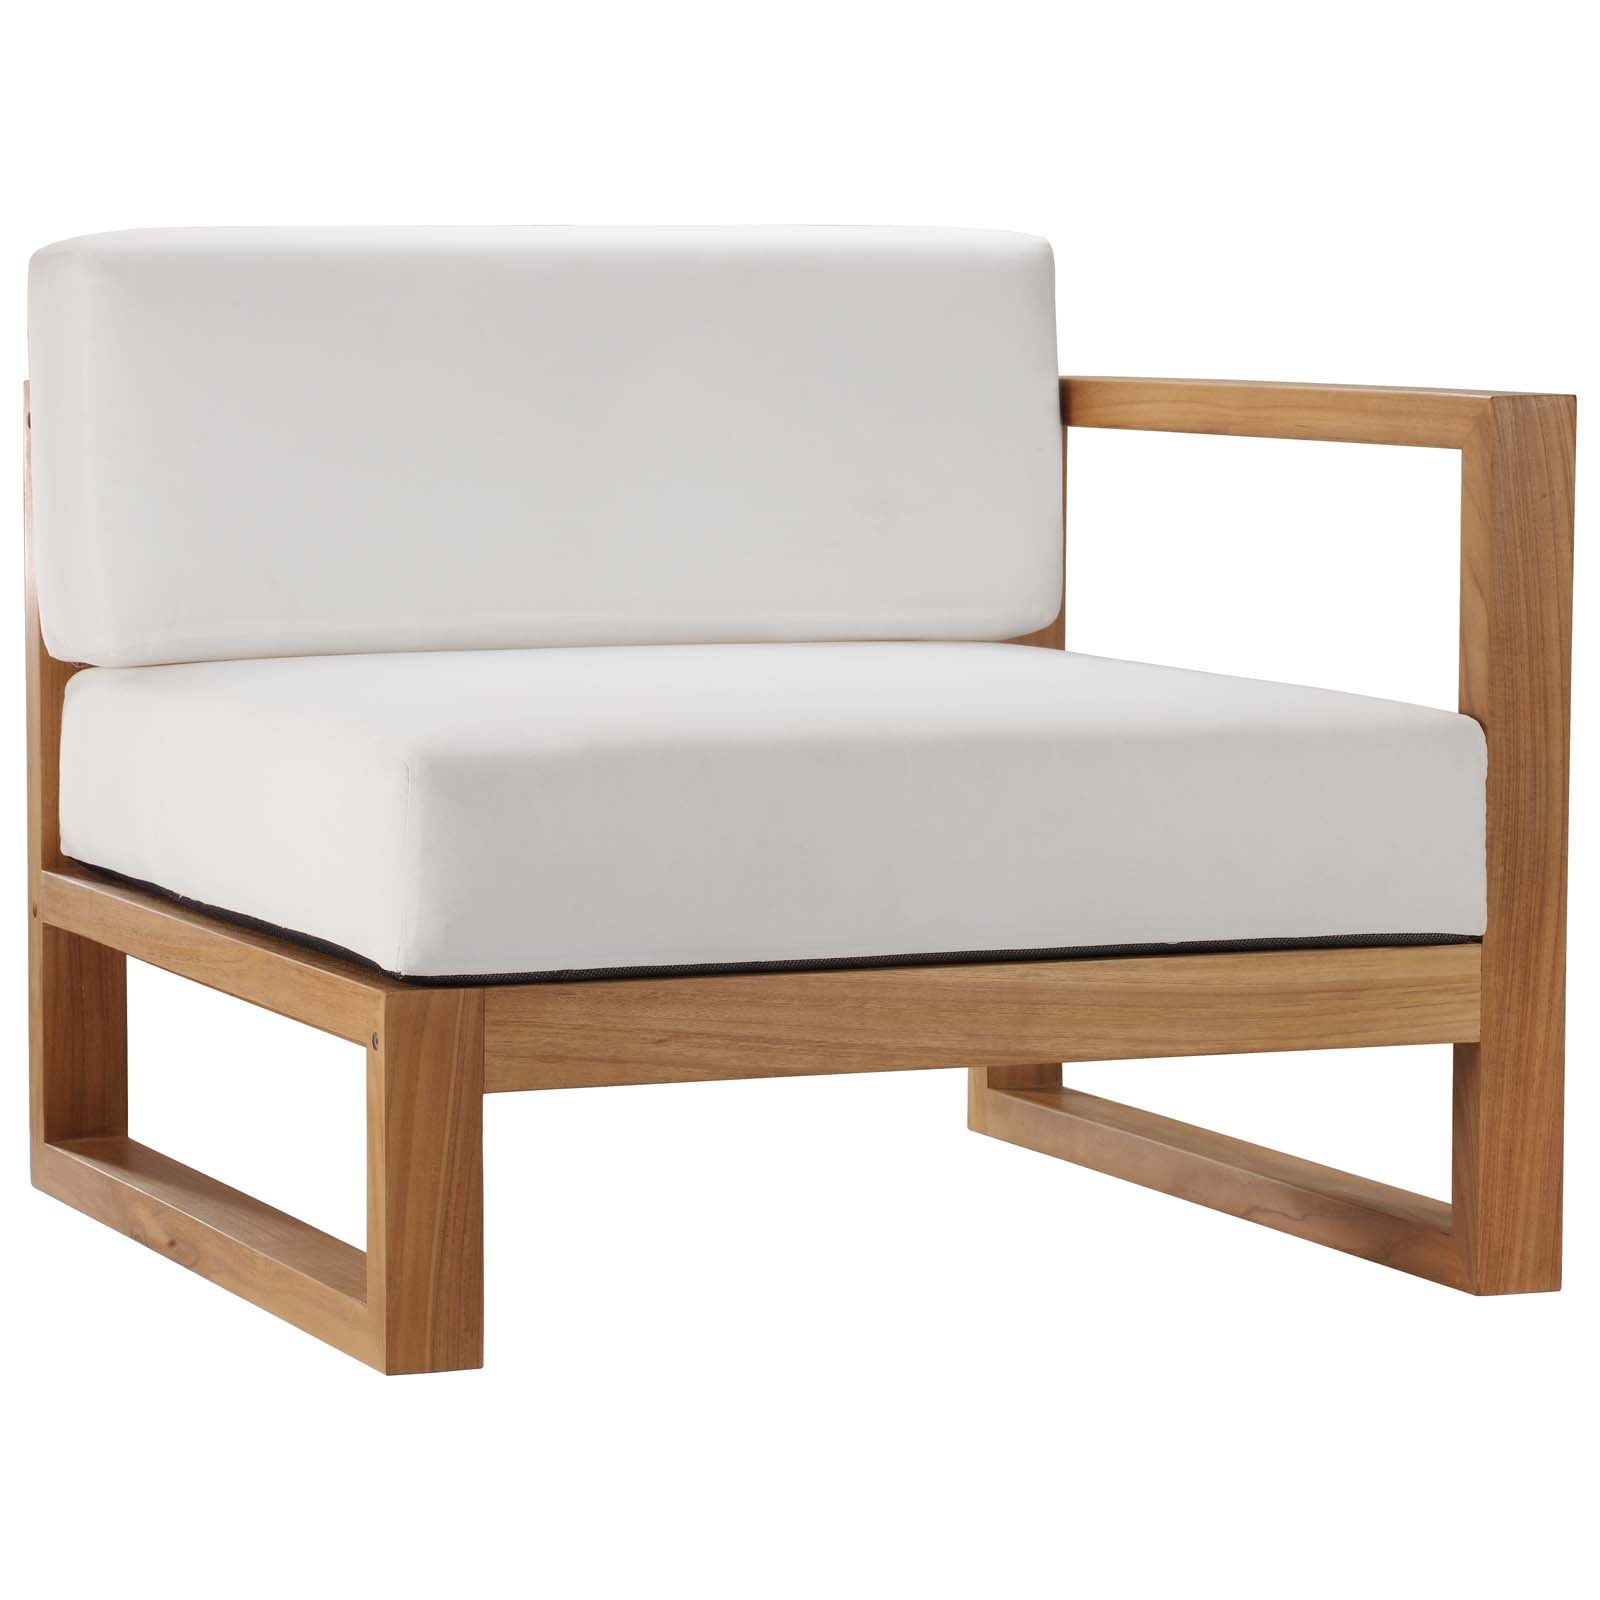 Upland Outdoor Patio Teak Wood 2-Piece Sectional Sofa Loveseat - East Shore Modern Home Furnishings